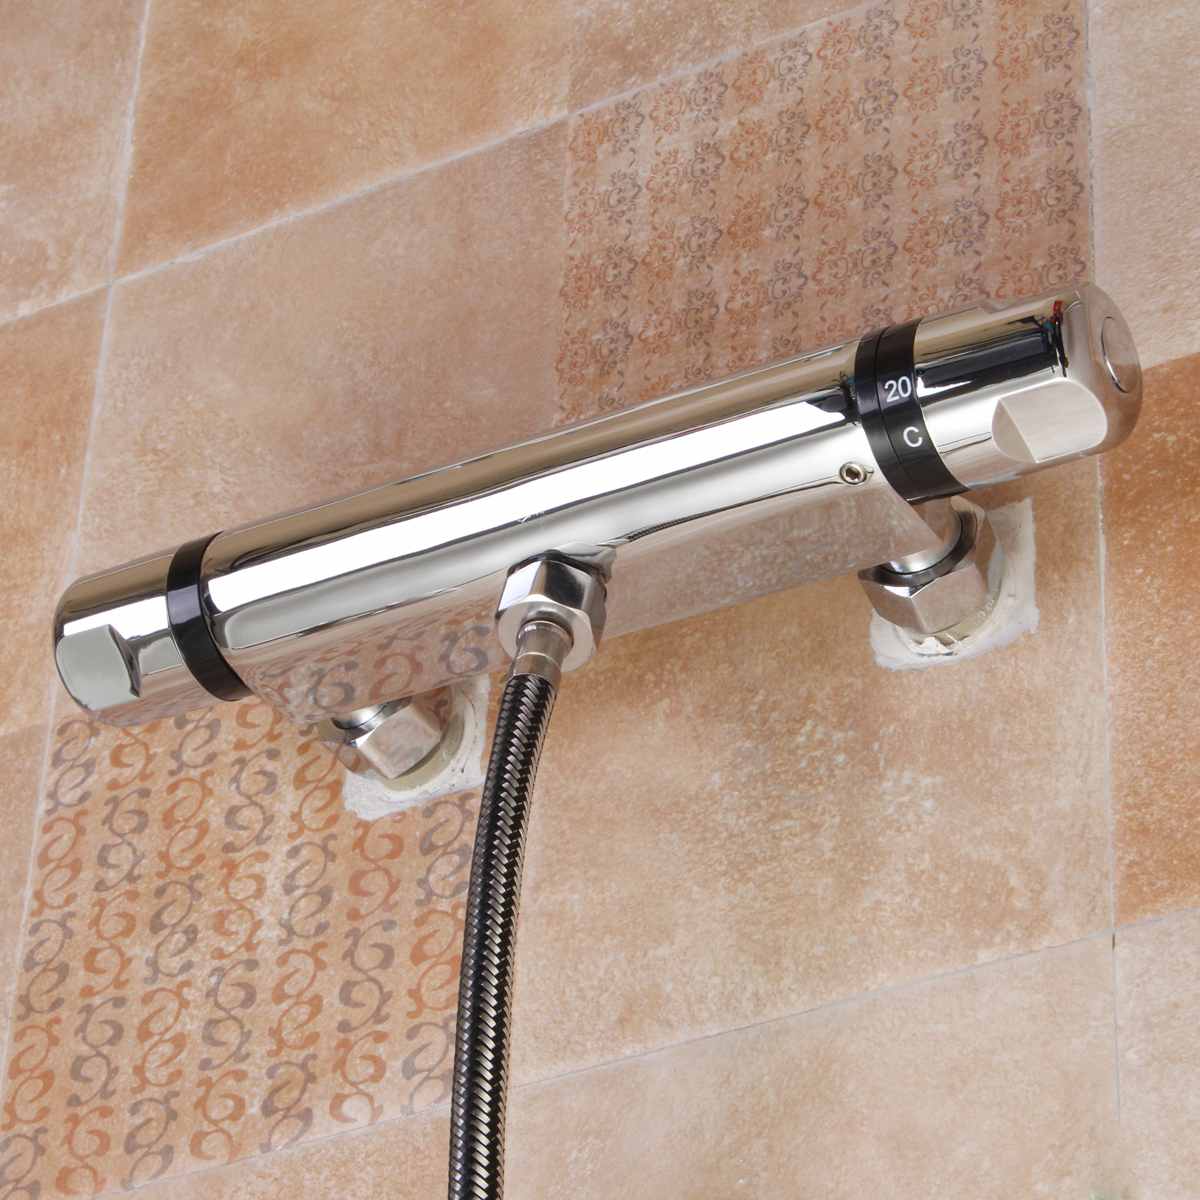 Xueqin Thermostatic Bath Mixer Shower Control Valve Bottom Faucet Wall Mounted Bathroom Hot And Cold Brass Mixer Bathtub Tap